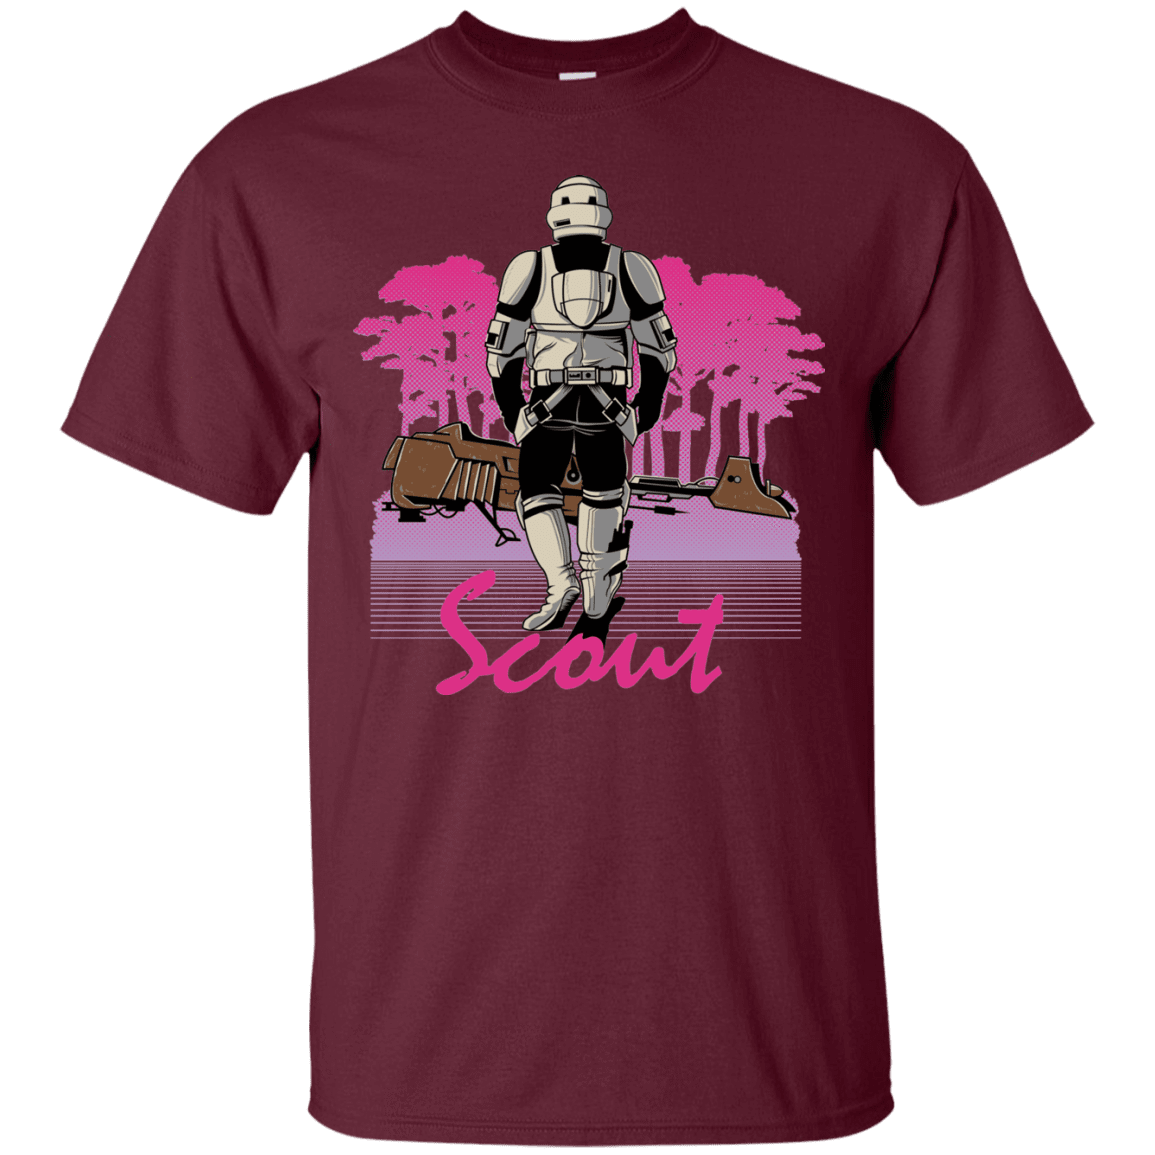 T-Shirts Maroon / Small SCOUT DRIVE T-Shirt